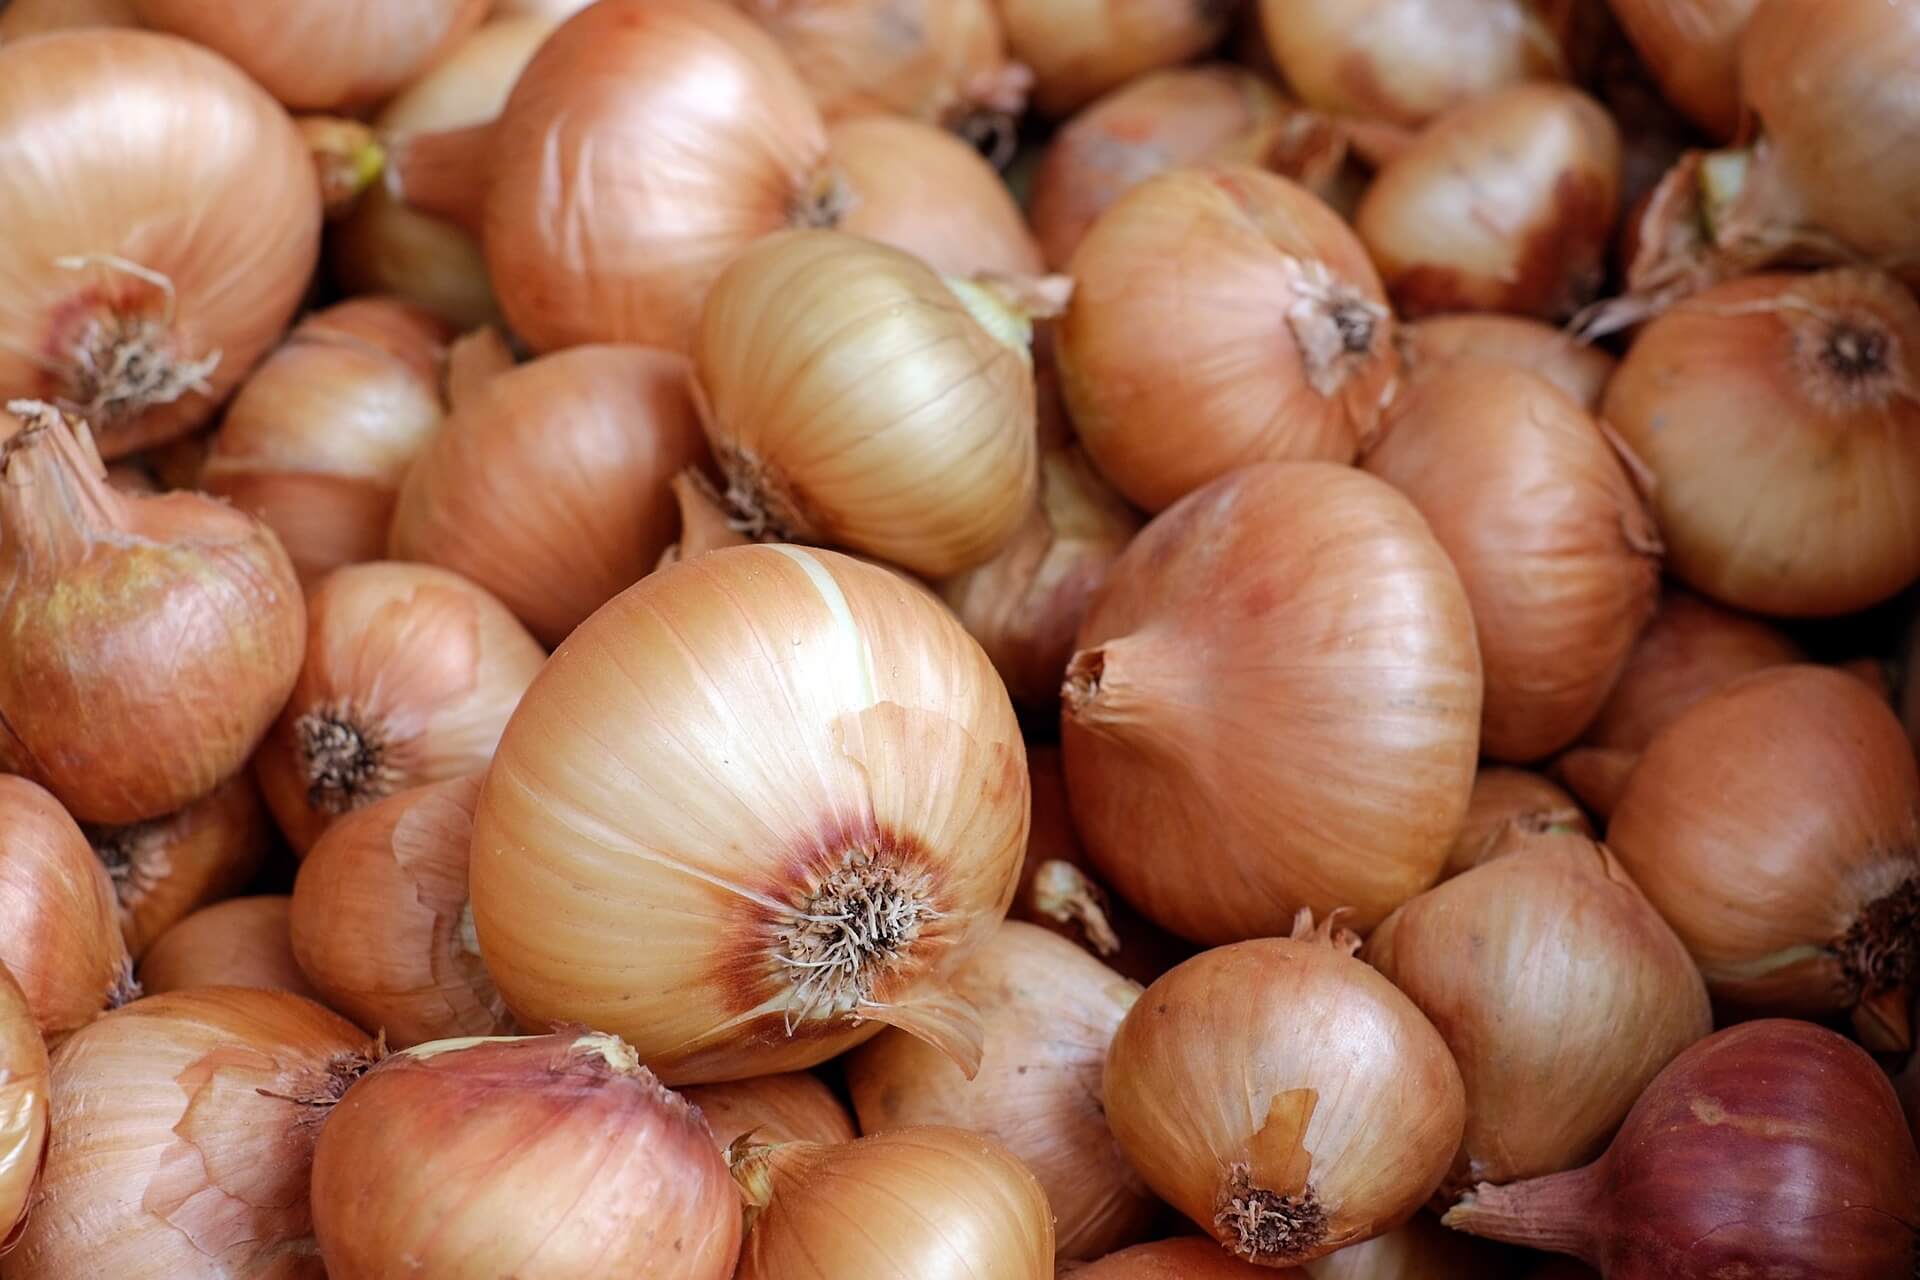 Growing onions at home